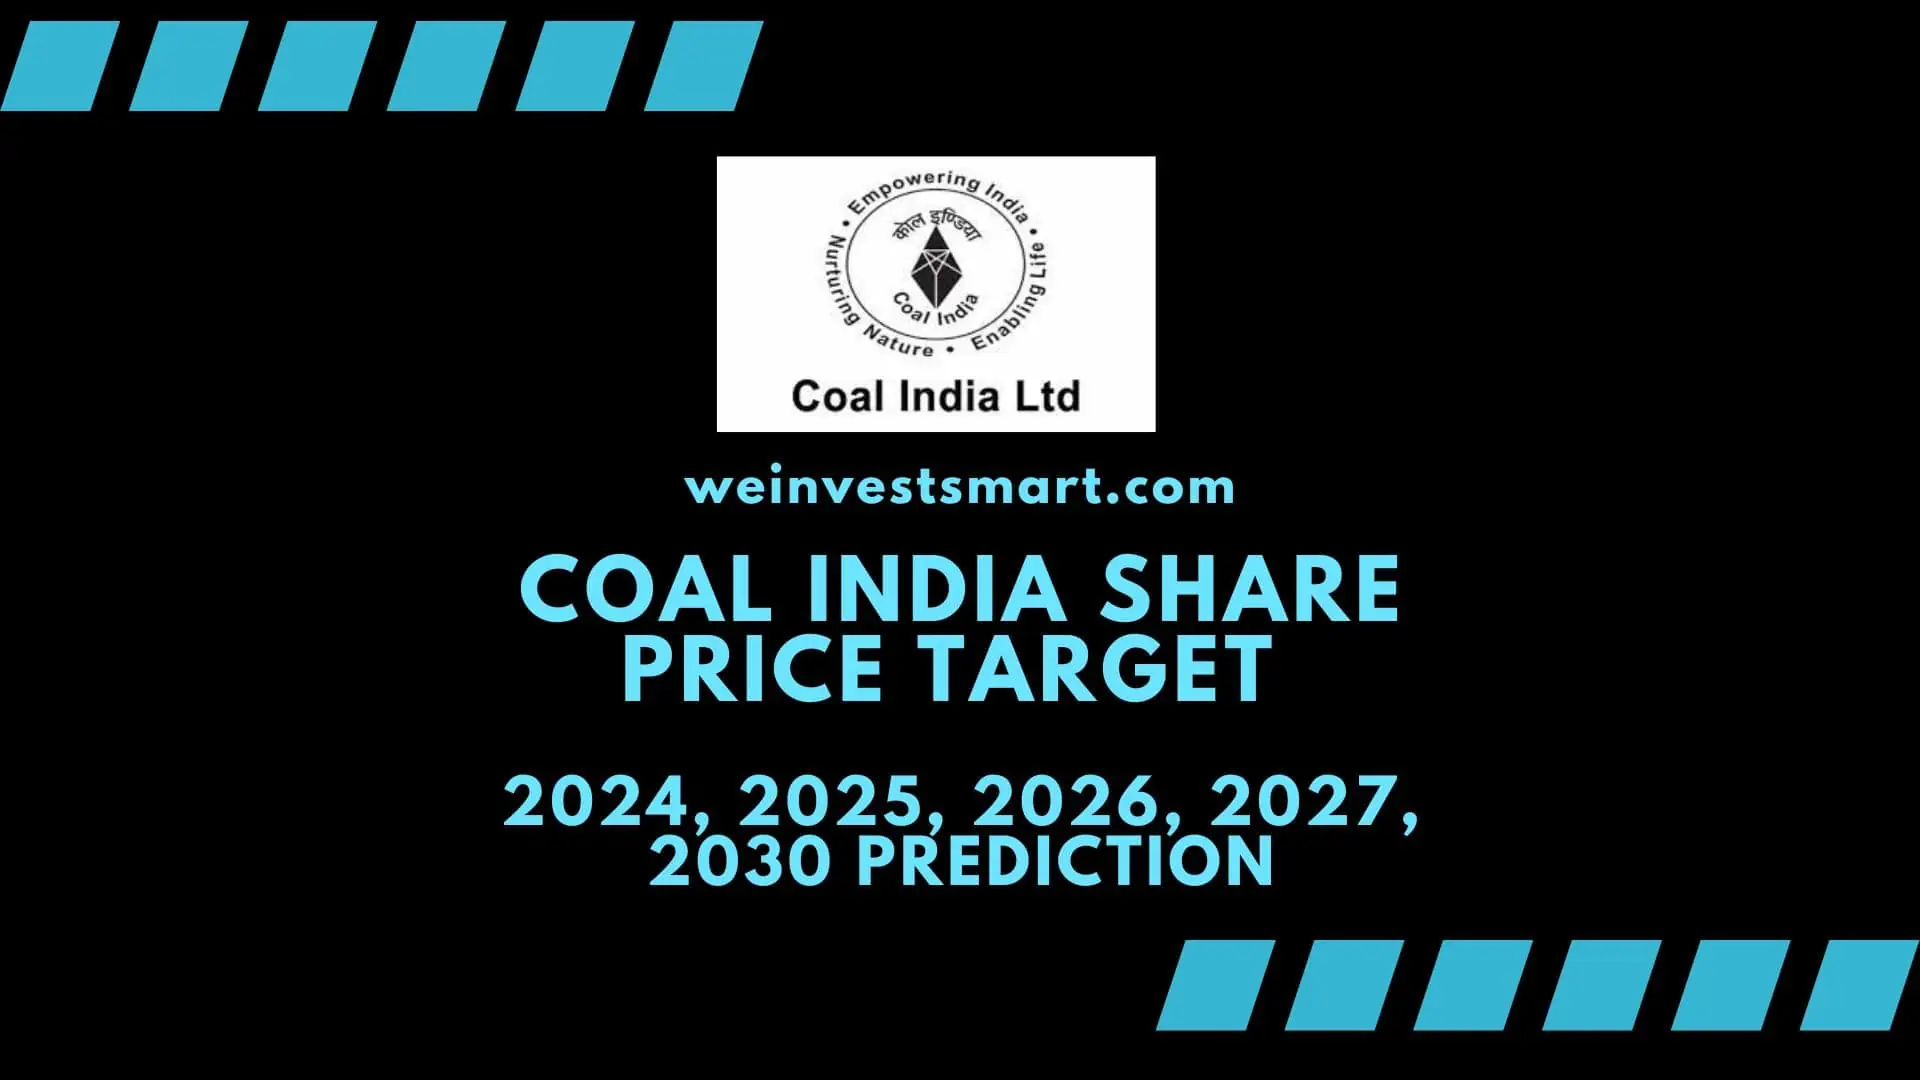 Coal India share price target 2024, 2025, 2026, 2027, 2030 prediction